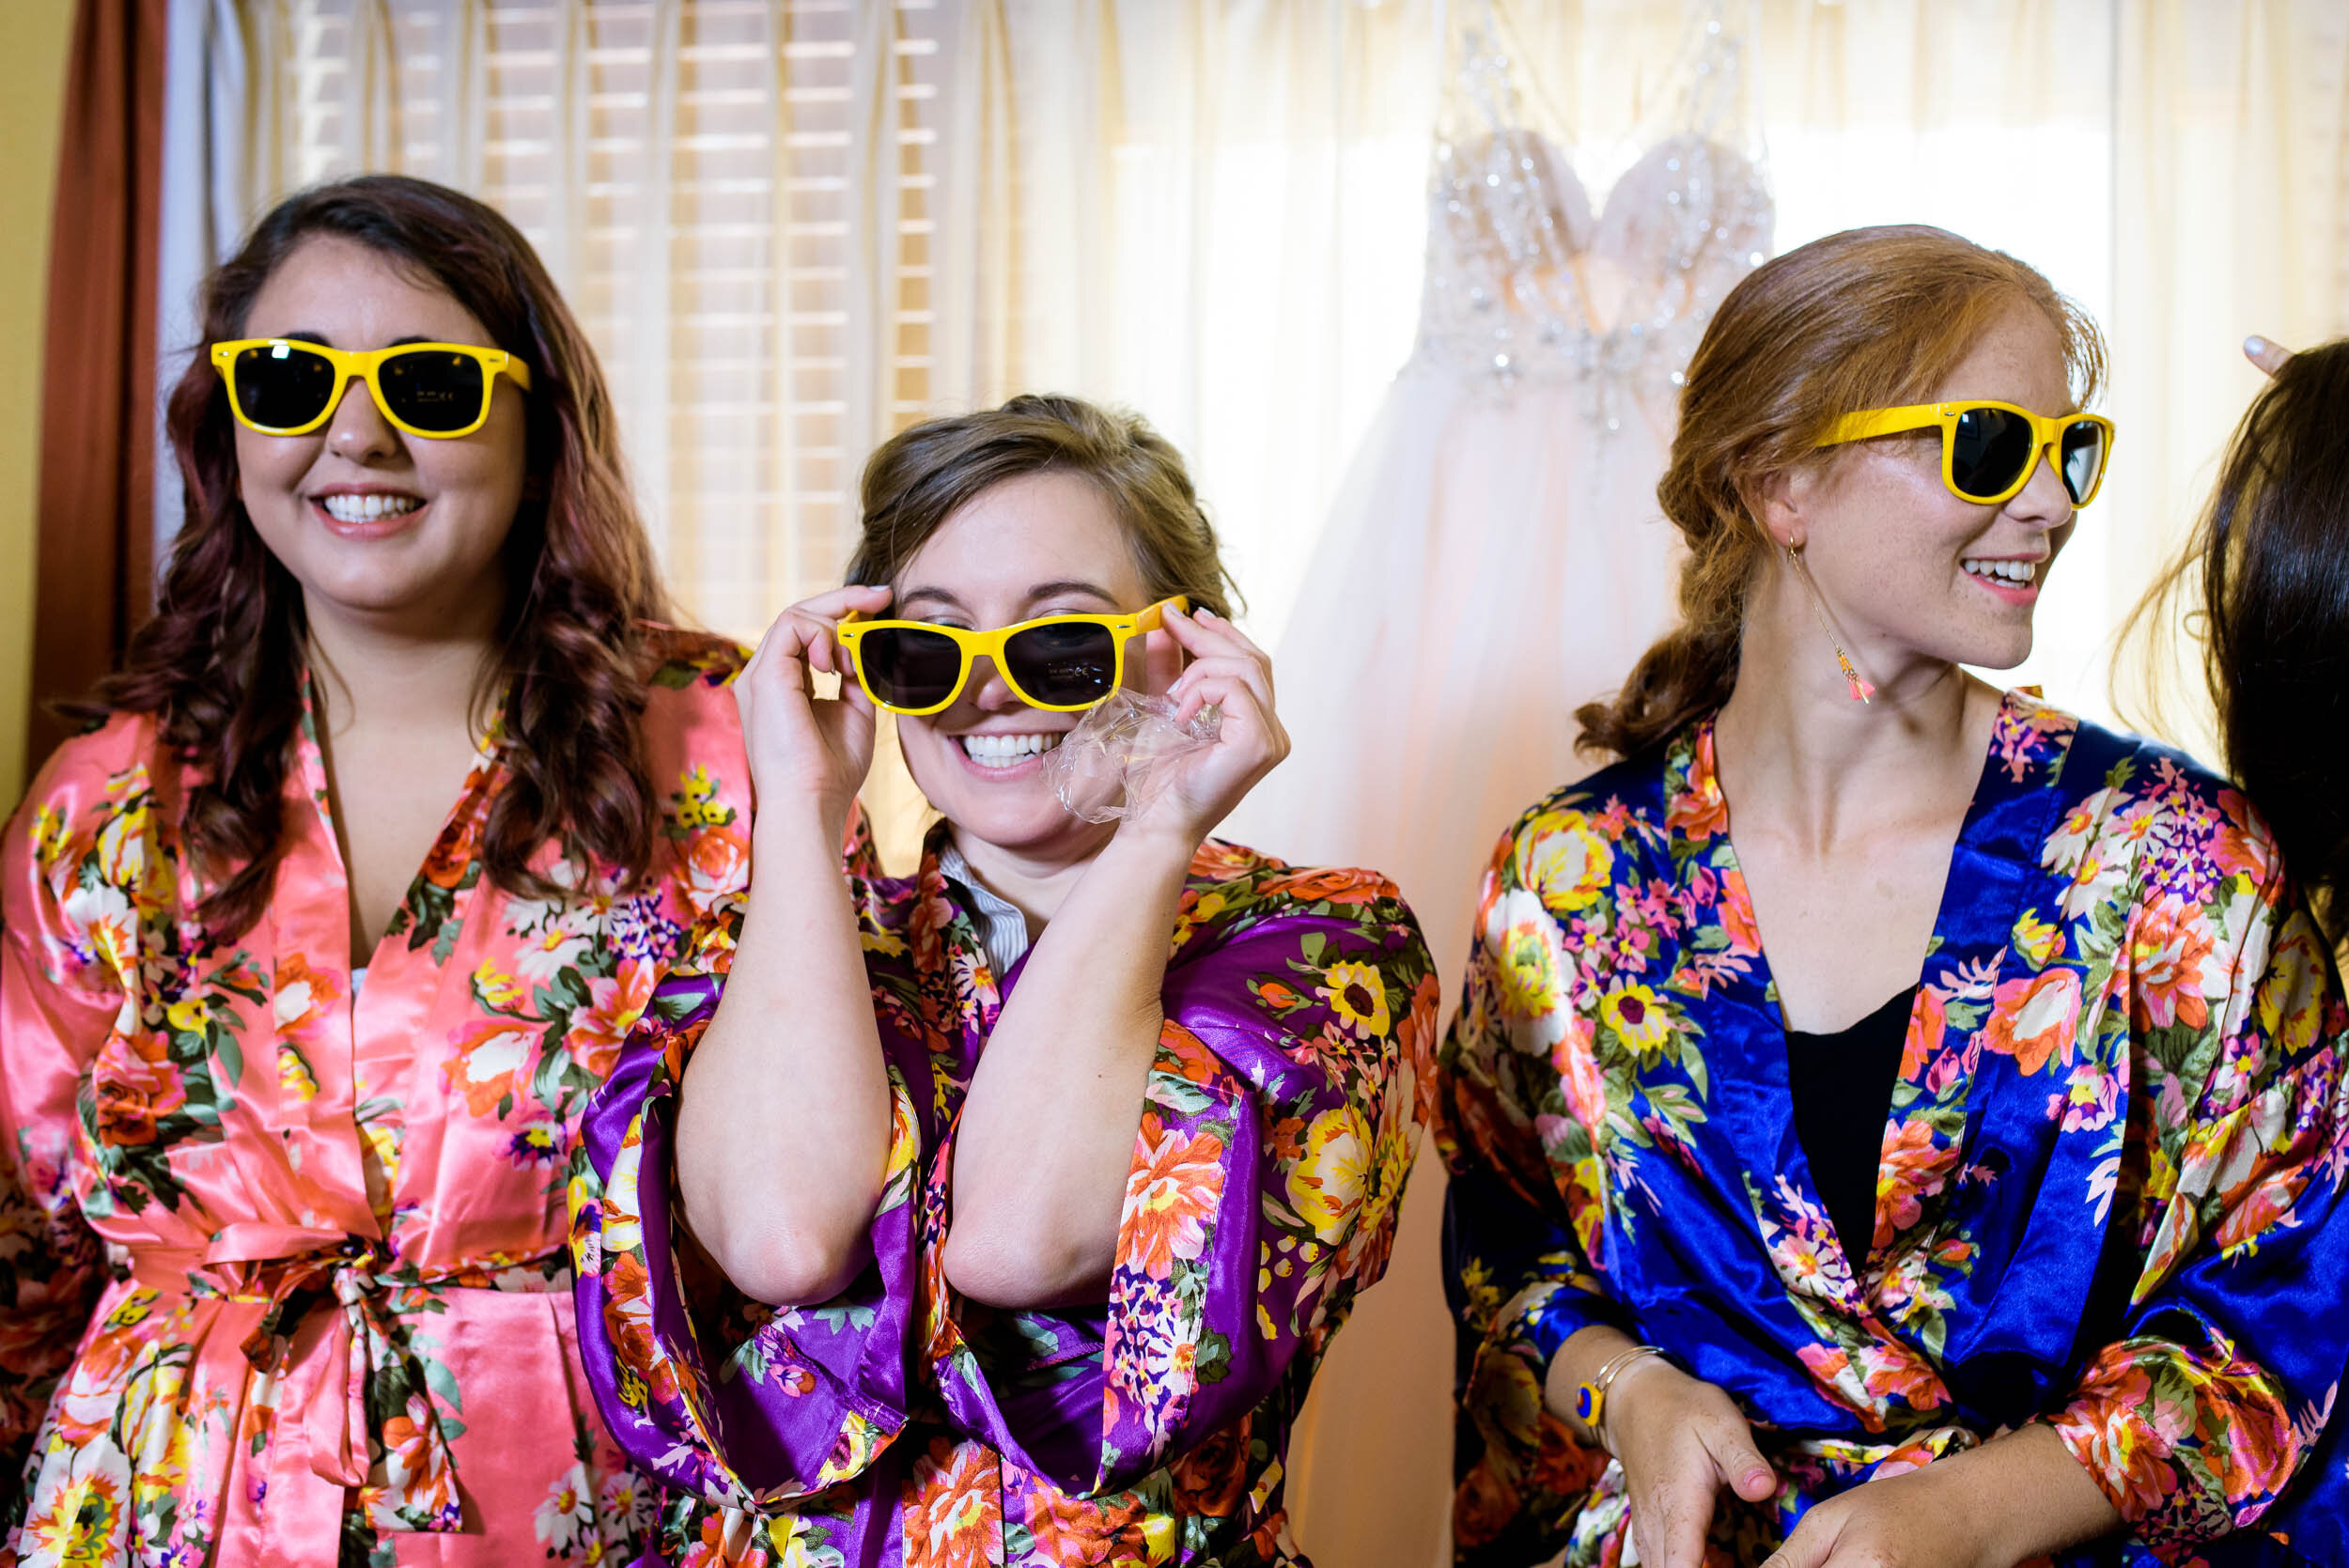 Bridesmaids having fun with matching robes and sunglasses: Columbus Park Refectory wedding captured by J. Brown Photography.